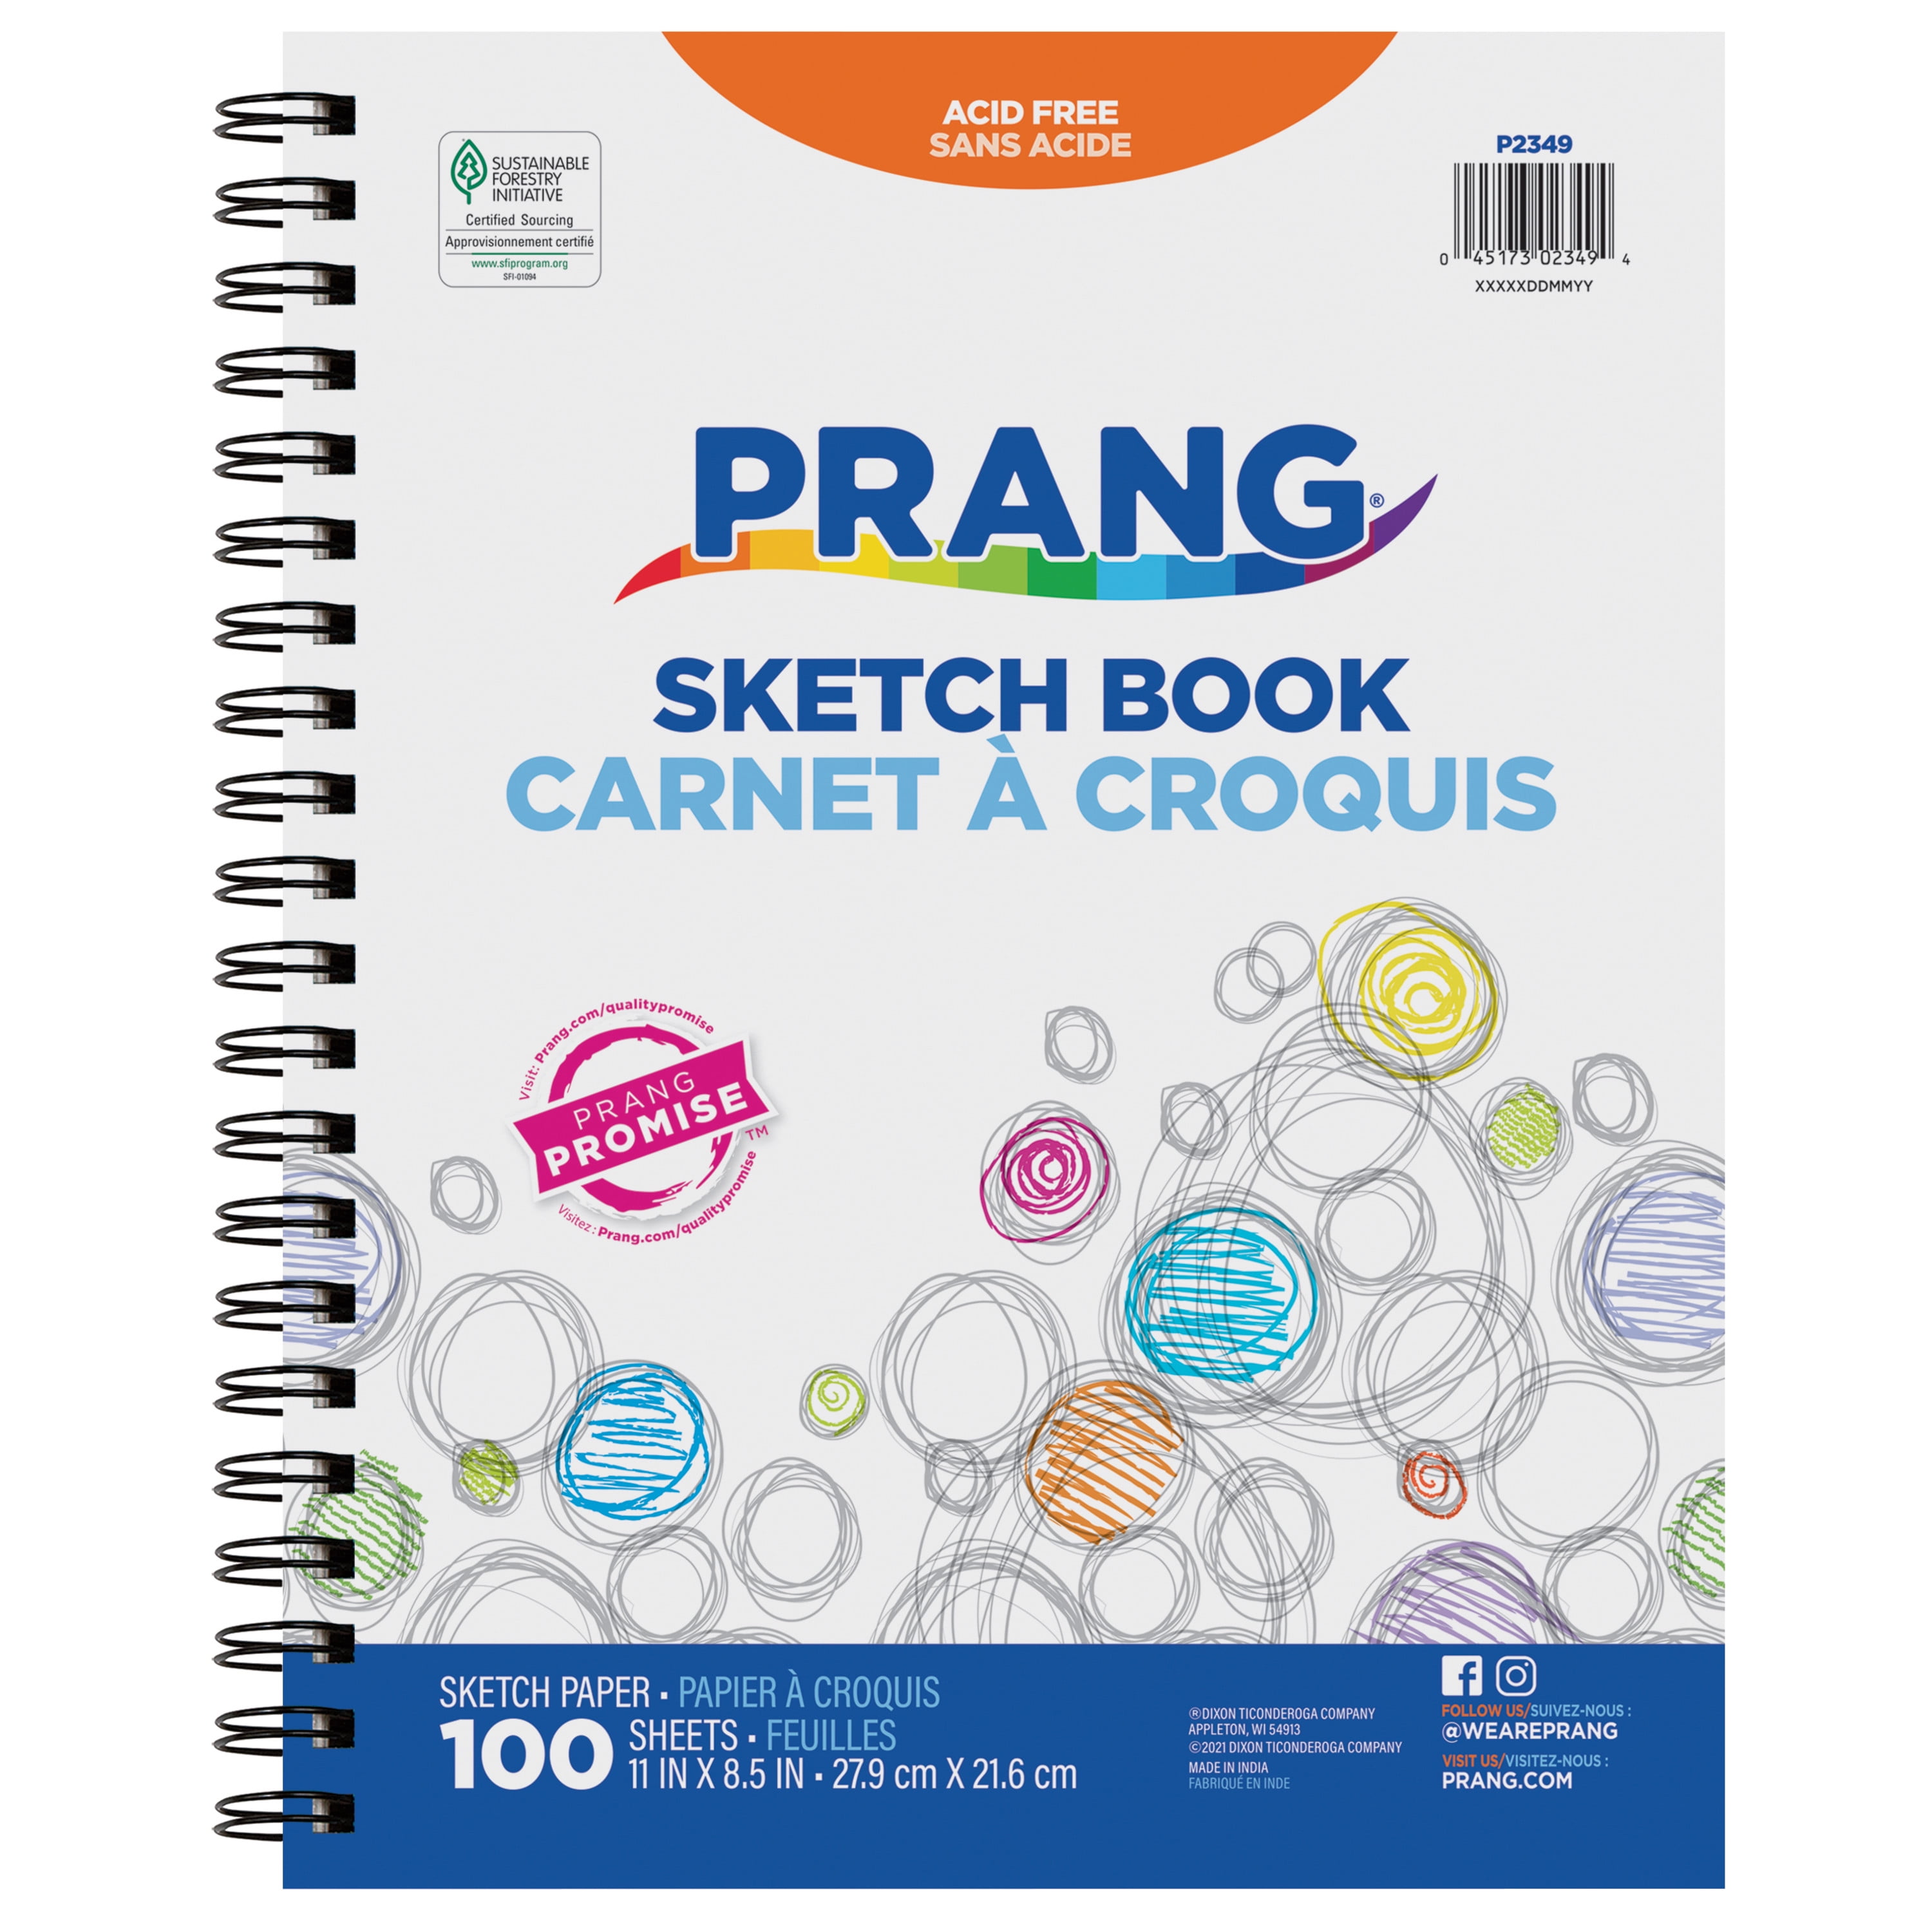 Drawing Pad For Kids: Blank Paper Sketch Book for Drawing Practice, 110  Pages, 8.5 x 11 Large Sketchbook for Kids Age 4,5,6,7,8,9,10,11 and 12  Year Old Boys and Girls by Mantis Book